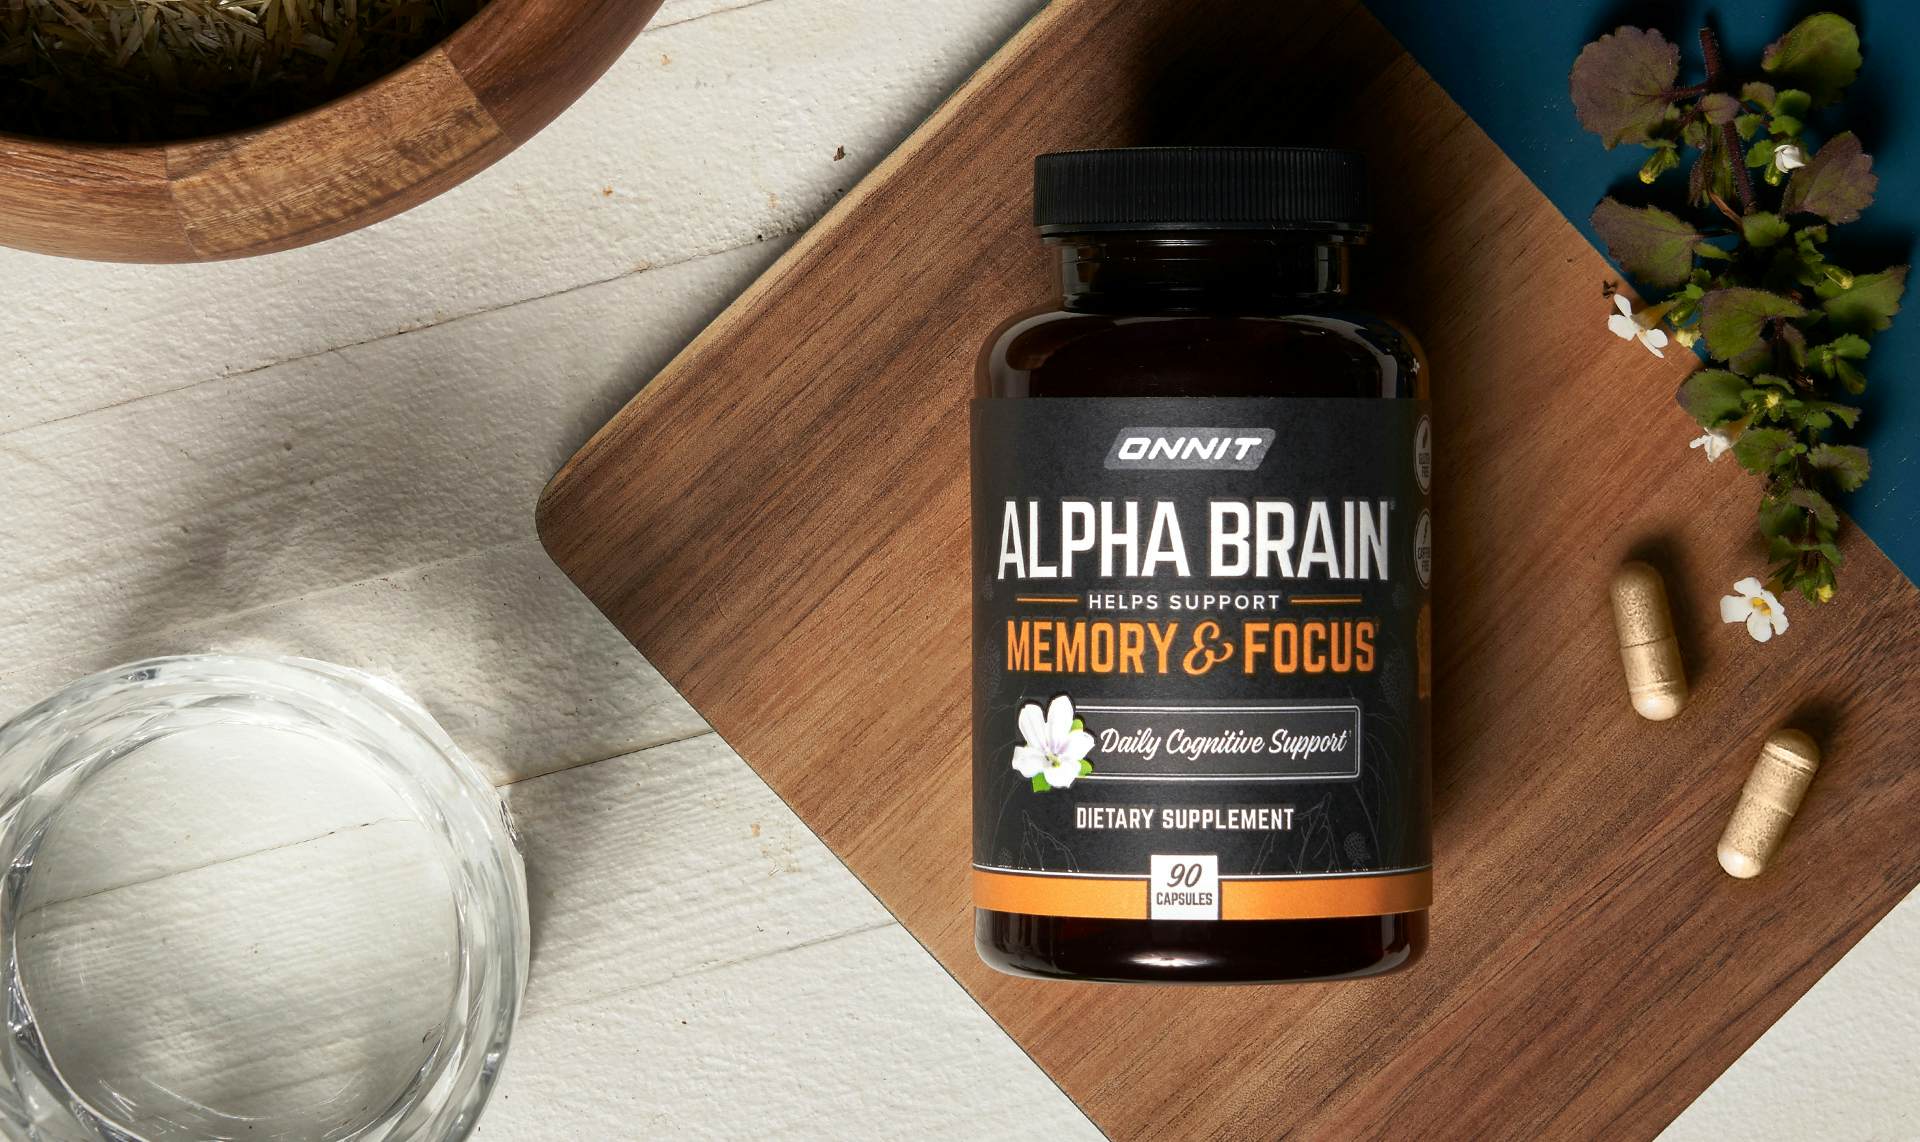 https://onnits3.imgix.net/product-page/alpha-brain-30-free-trial/alpha-brain-bottle--wide.jpg?q=40&fm=pjpg&auto=compress,format